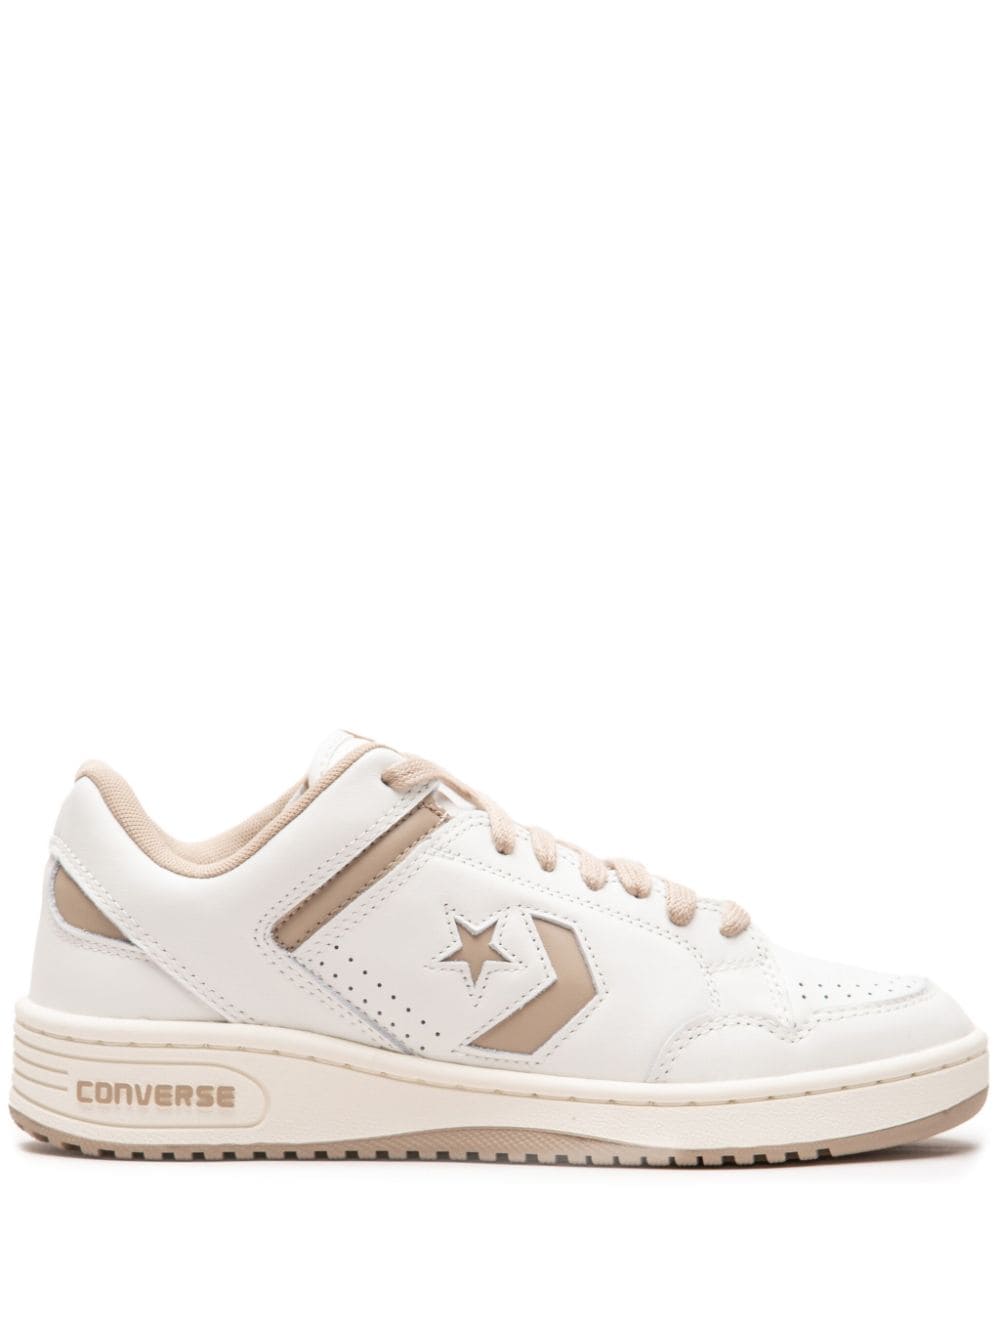 Converse Weapon leather sneakers - White von Converse